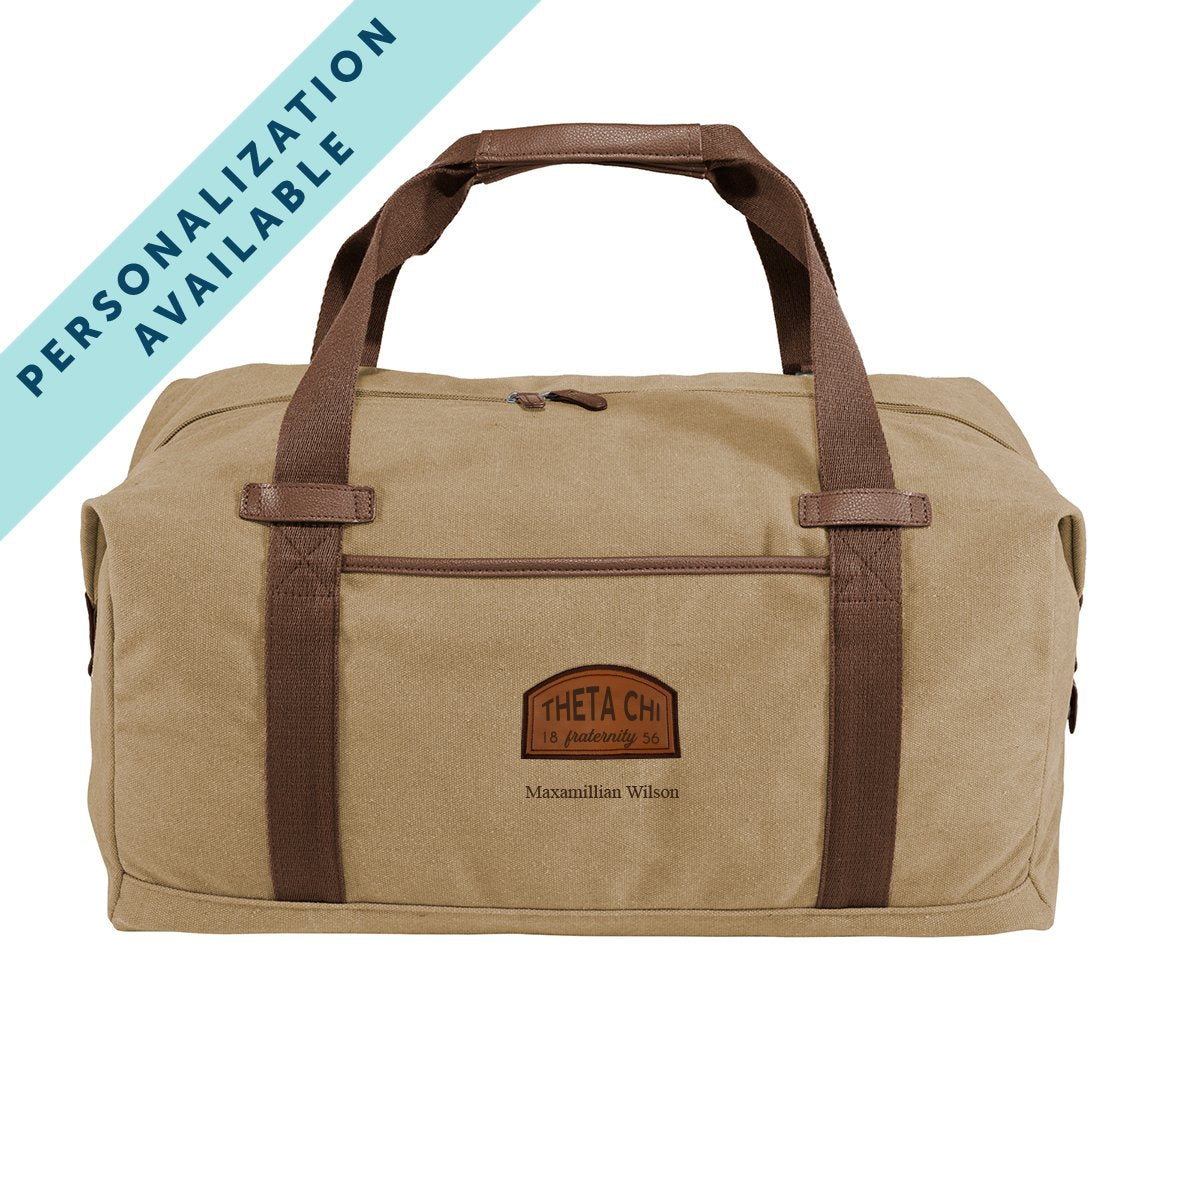 Theta Chi Khaki Canvas Duffel With Leather Patch | Theta Chi | Bags > Duffle bags